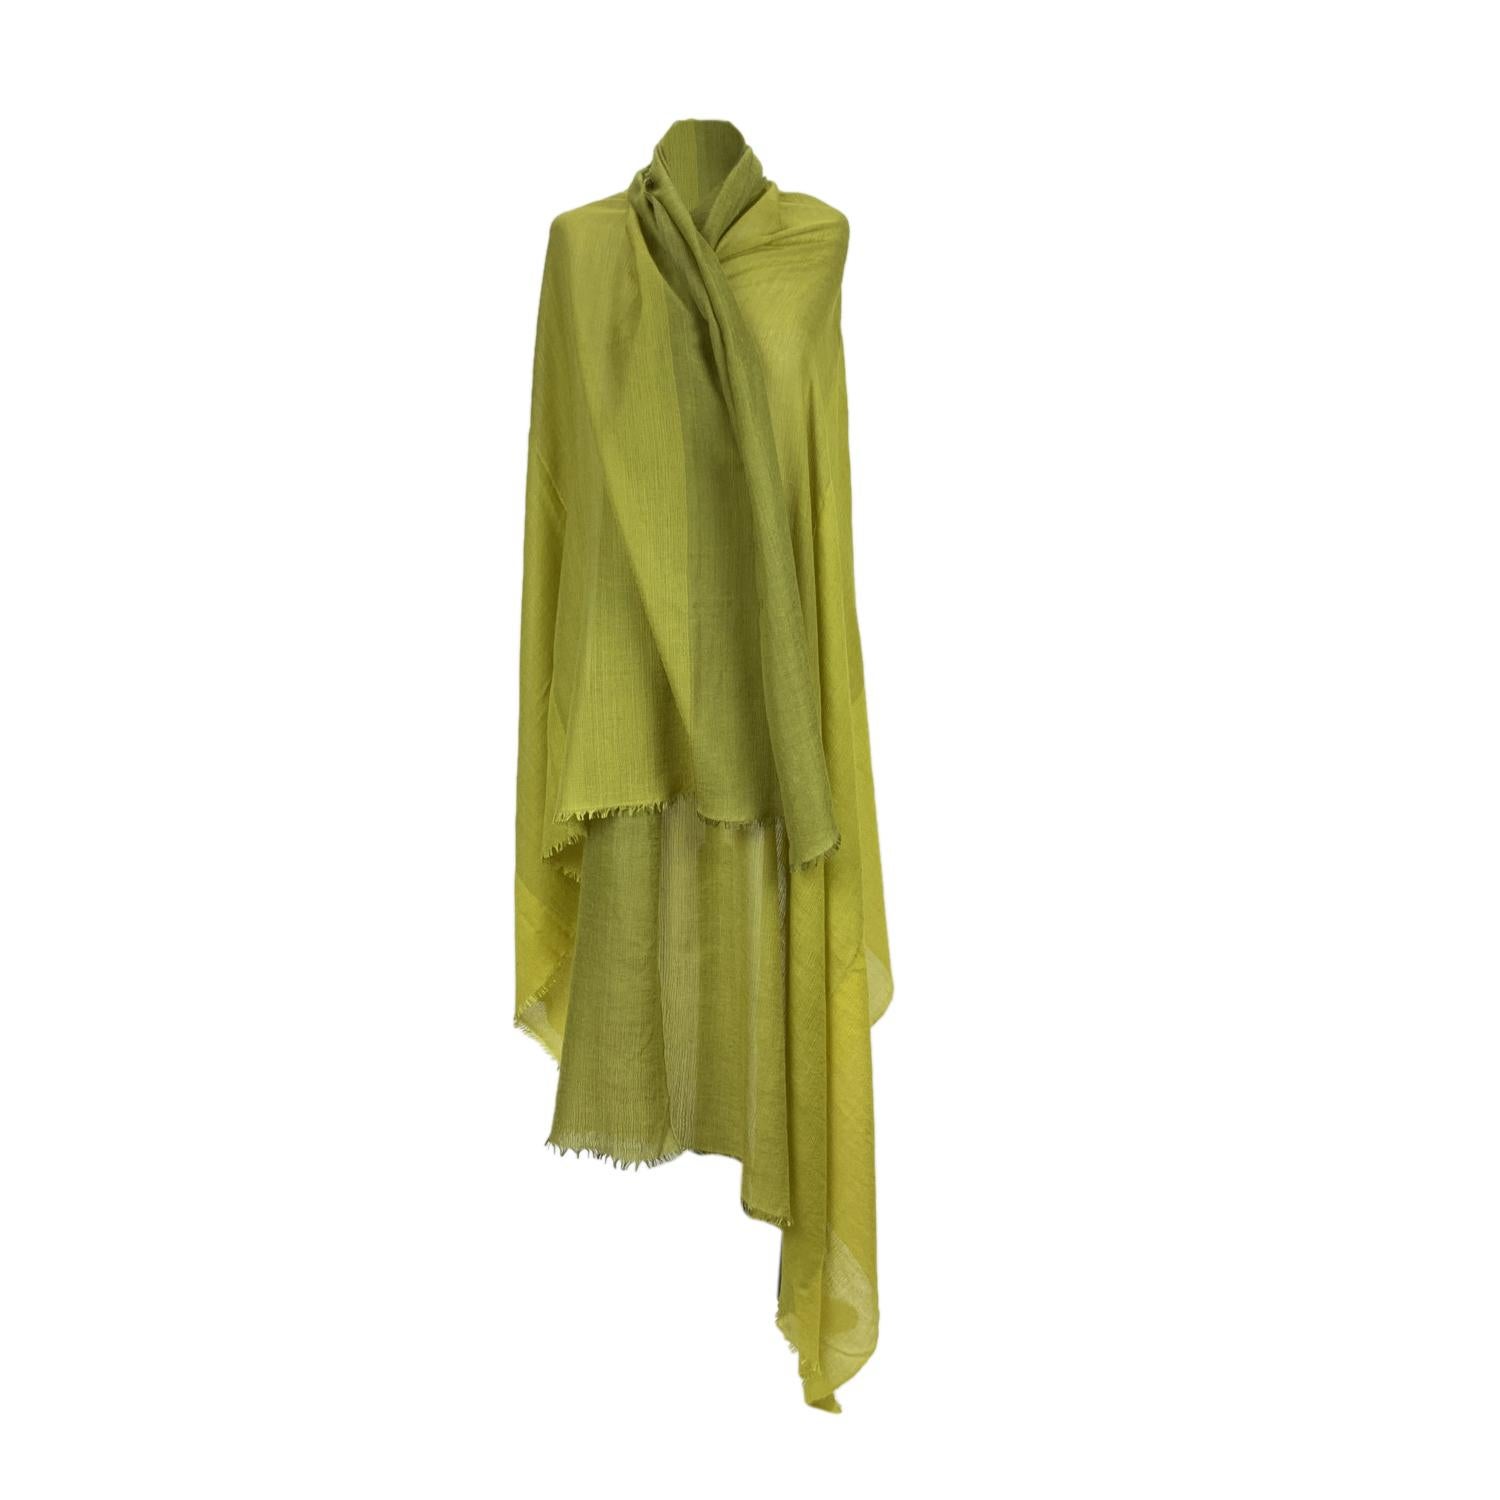 Rare cashmere and silk scarf by Hermes. Yellow and Green colors. Big H pattern in the center. Composition; 50% Cashmere, 50% Silk. Fringed hem. Approx. measurements: 50 x 90 inches - 127 x 229. Handwoven in Nepal. 'HERMES - Paris' and composition